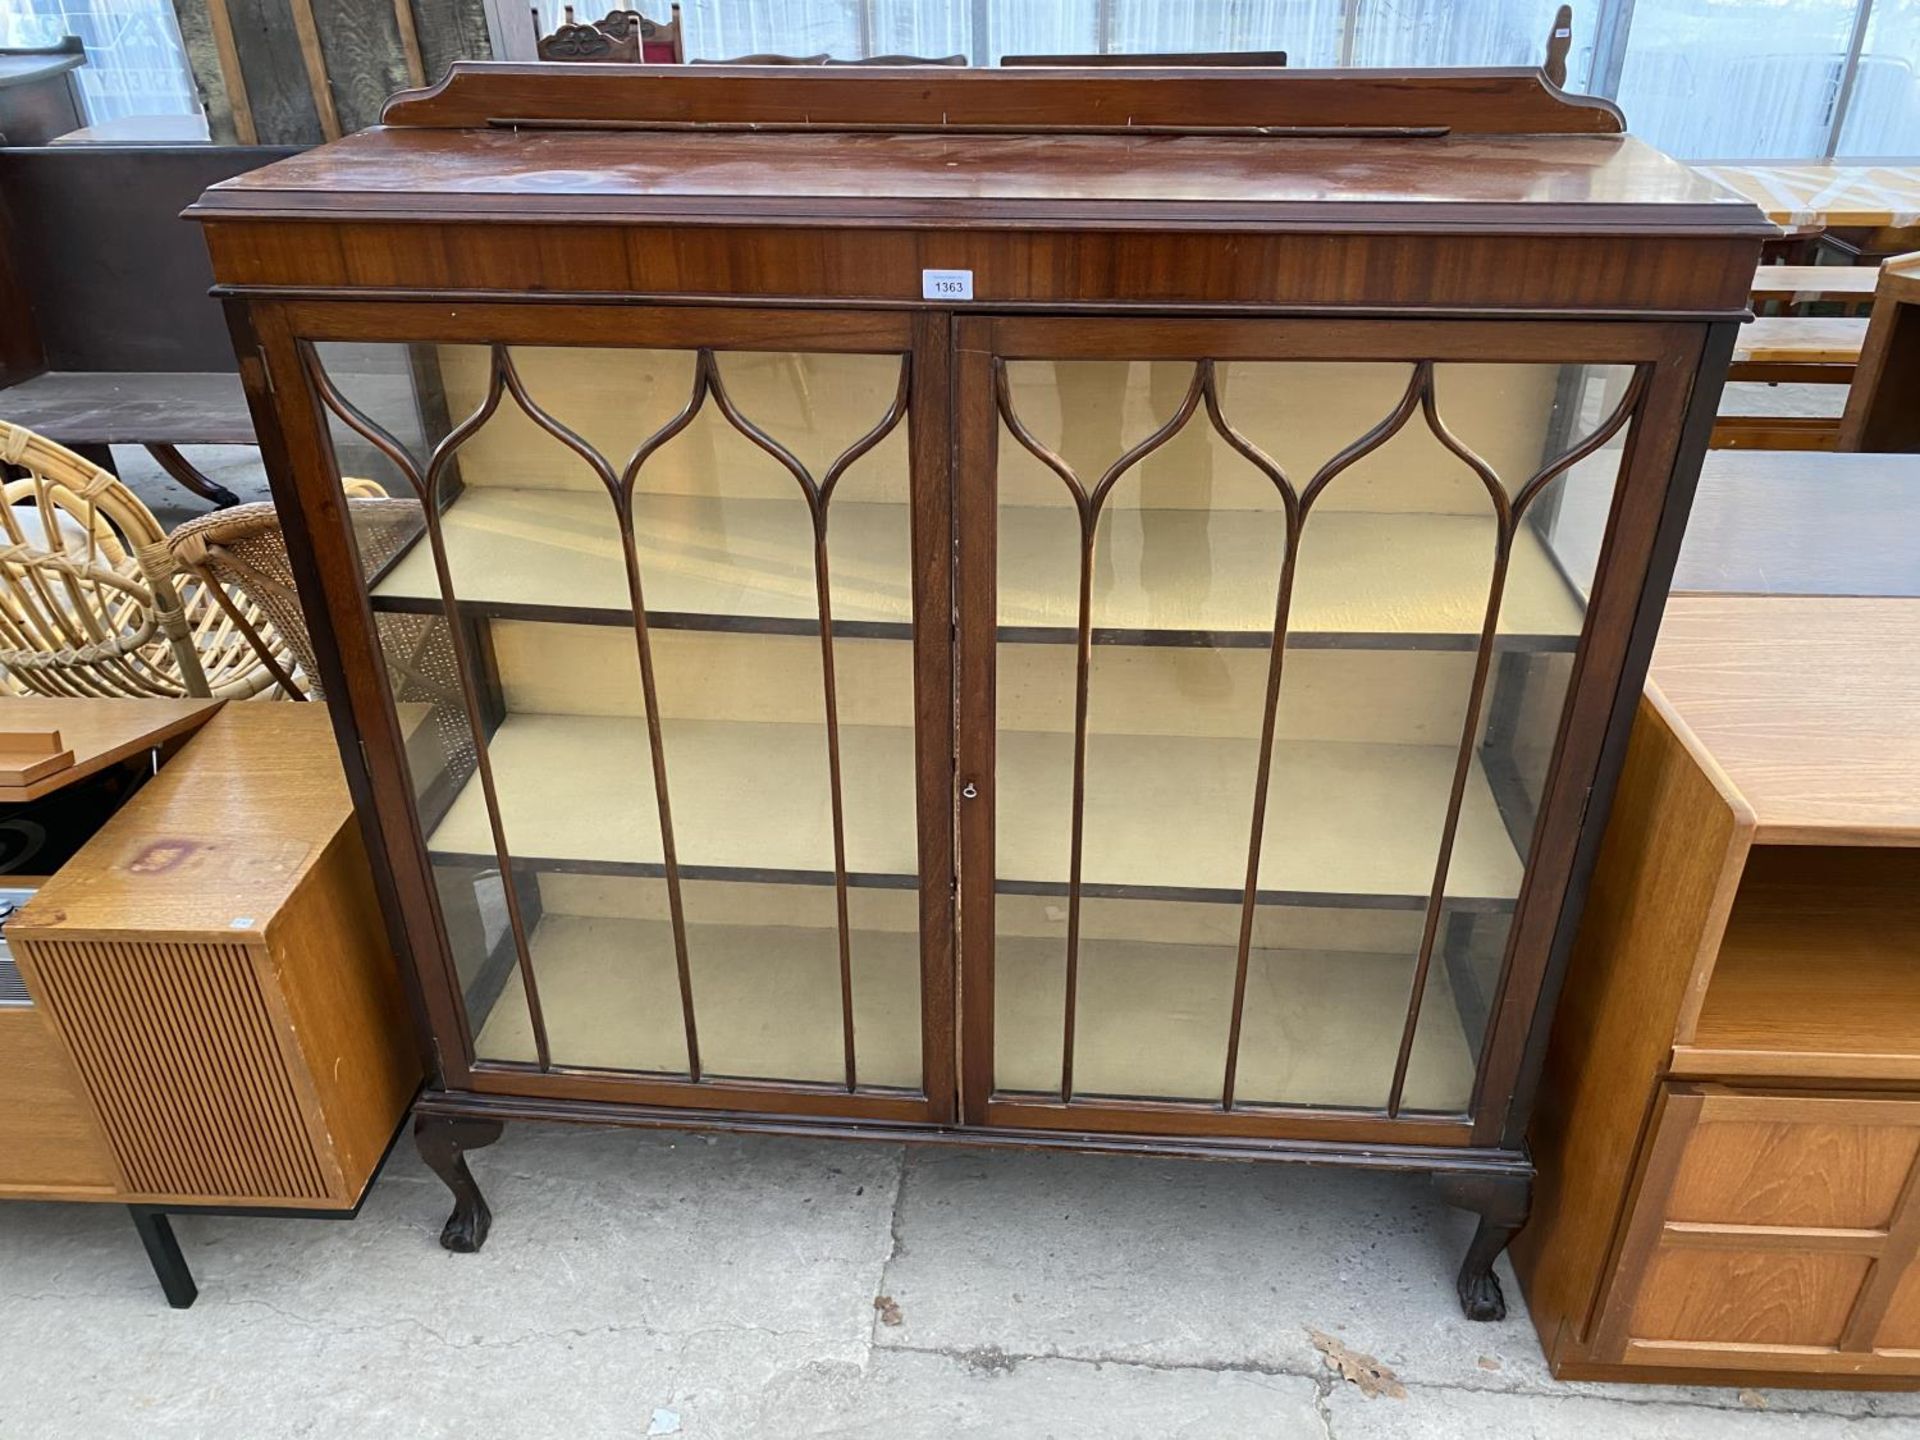 A MAHOGANY CHINA CABINET WITH TWO GLAZED PANEL DOORS AND SIDE PANELS